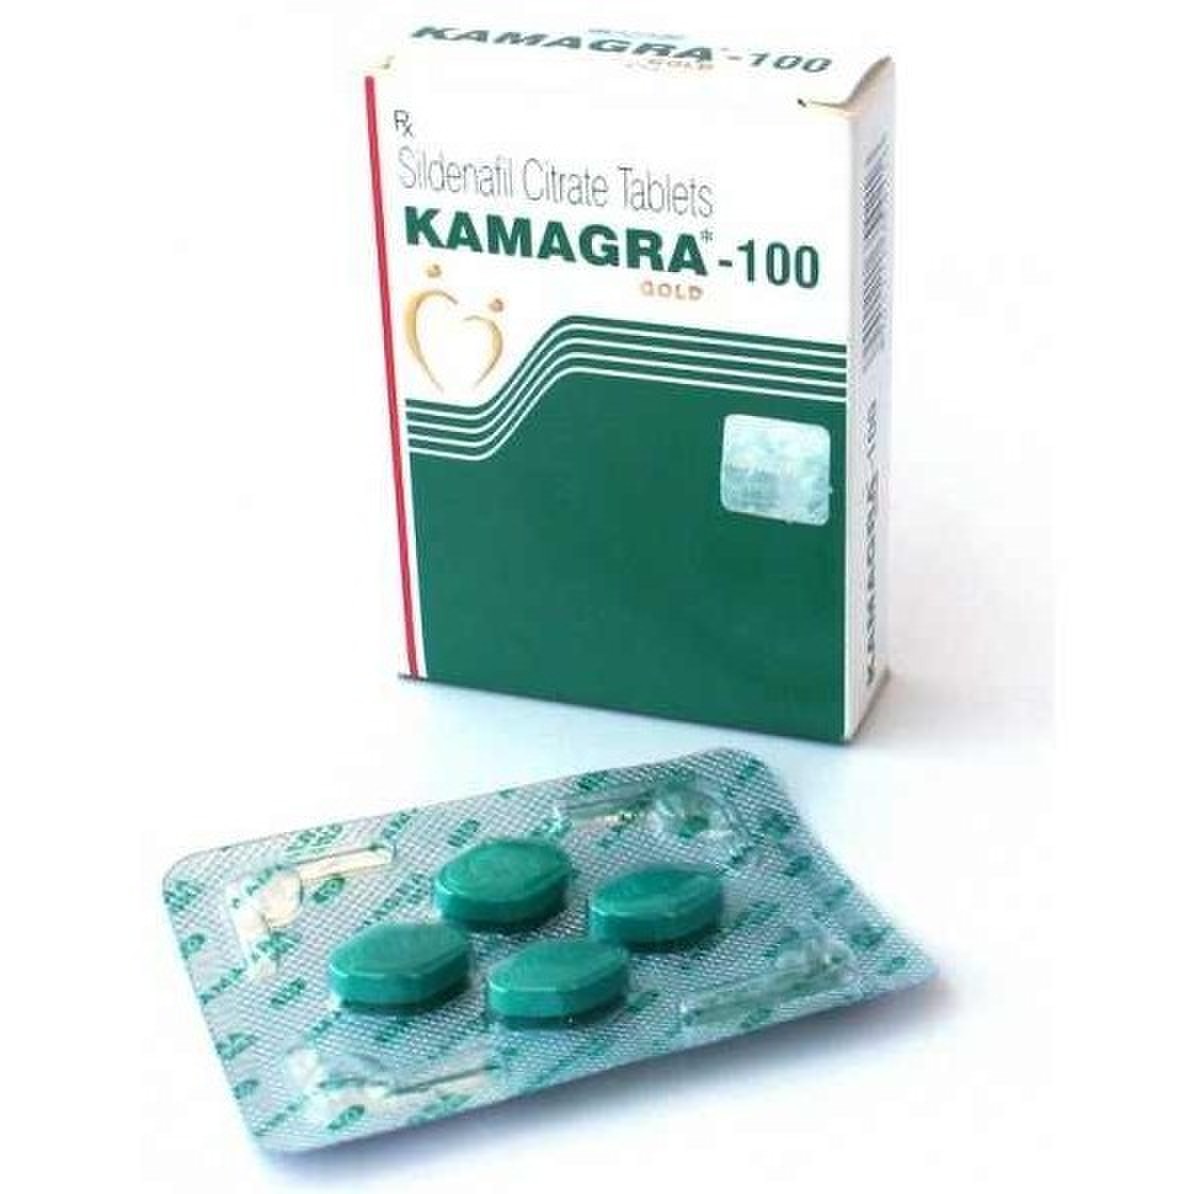 Reasons to Hire the Kamagra